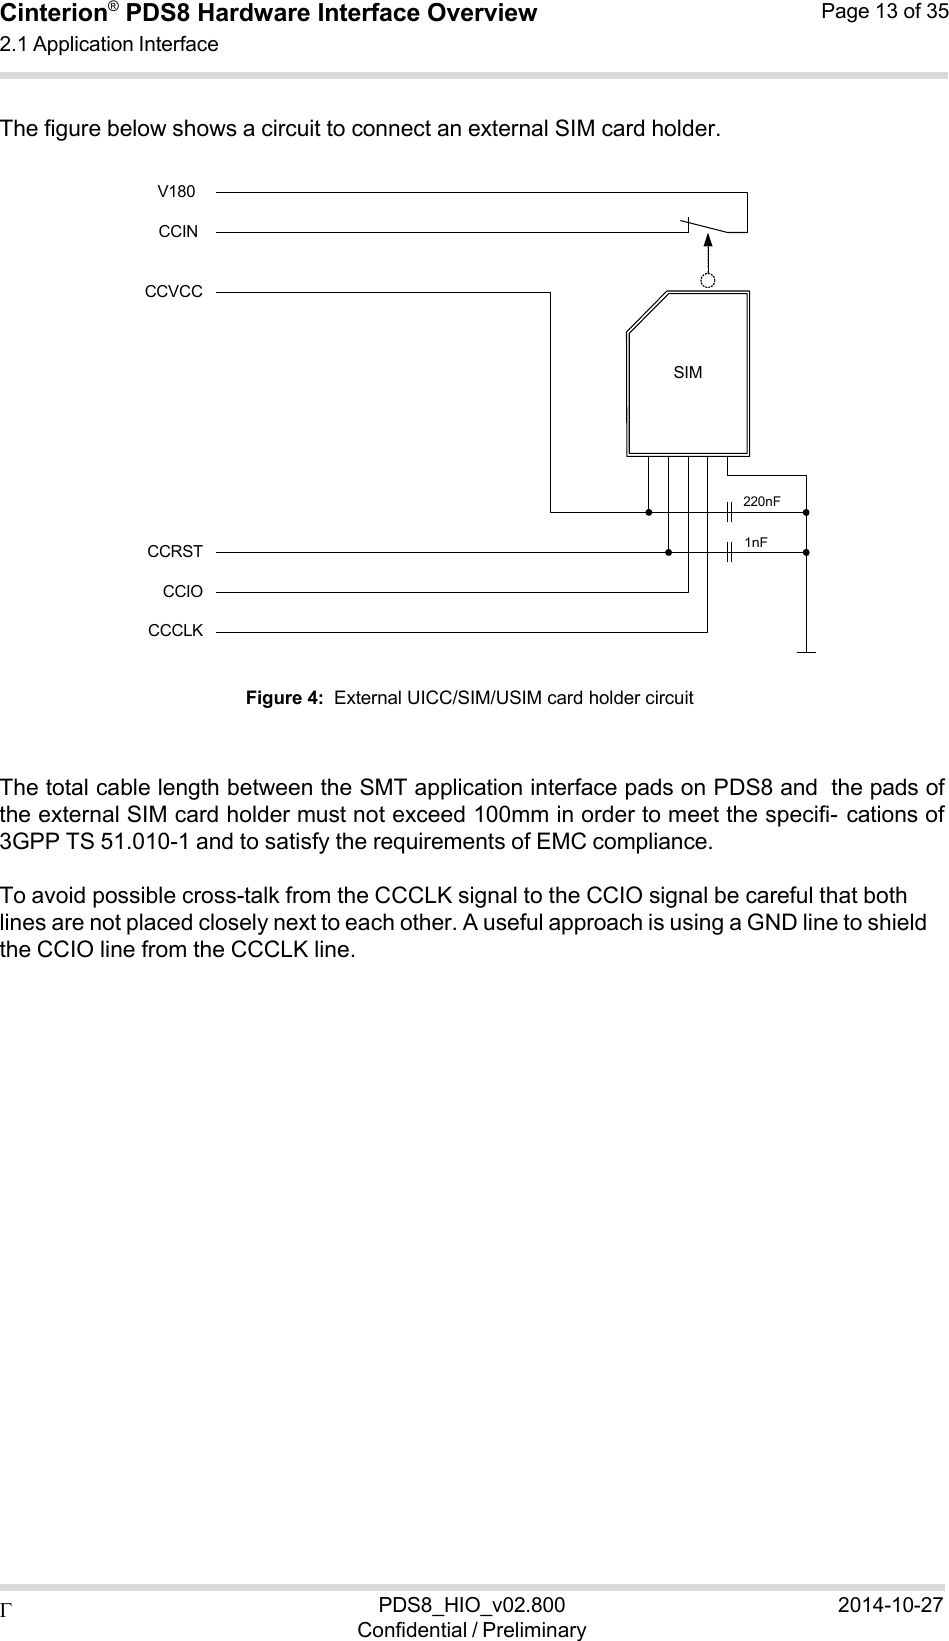  PDS8_HIO_v02.800Confidential / Preliminary2014-10-27Cinterion®  PDS8 Hardware Interface Overview 2.1 Application Interface Page 13 of 35   1nF SIM220nF  The figure below shows a circuit to connect an external SIM card holder.  V180  CCIN  CCVCC             CCRST CCIO CCCLK  Figure 4:  External UICC/SIM/USIM card holder circuit    The total cable length between the SMT application interface pads on PDS8 and the pads of the external SIM card holder must not exceed 100mm in order to meet the specifi- cations of 3GPP TS 51.010-1 and to satisfy the requirements of EMC compliance.  To avoid possible cross-talk from the CCCLK signal to the CCIO signal be careful that both lines are not placed closely next to each other. A useful approach is using a GND line to shield the CCIO line from the CCCLK line. 